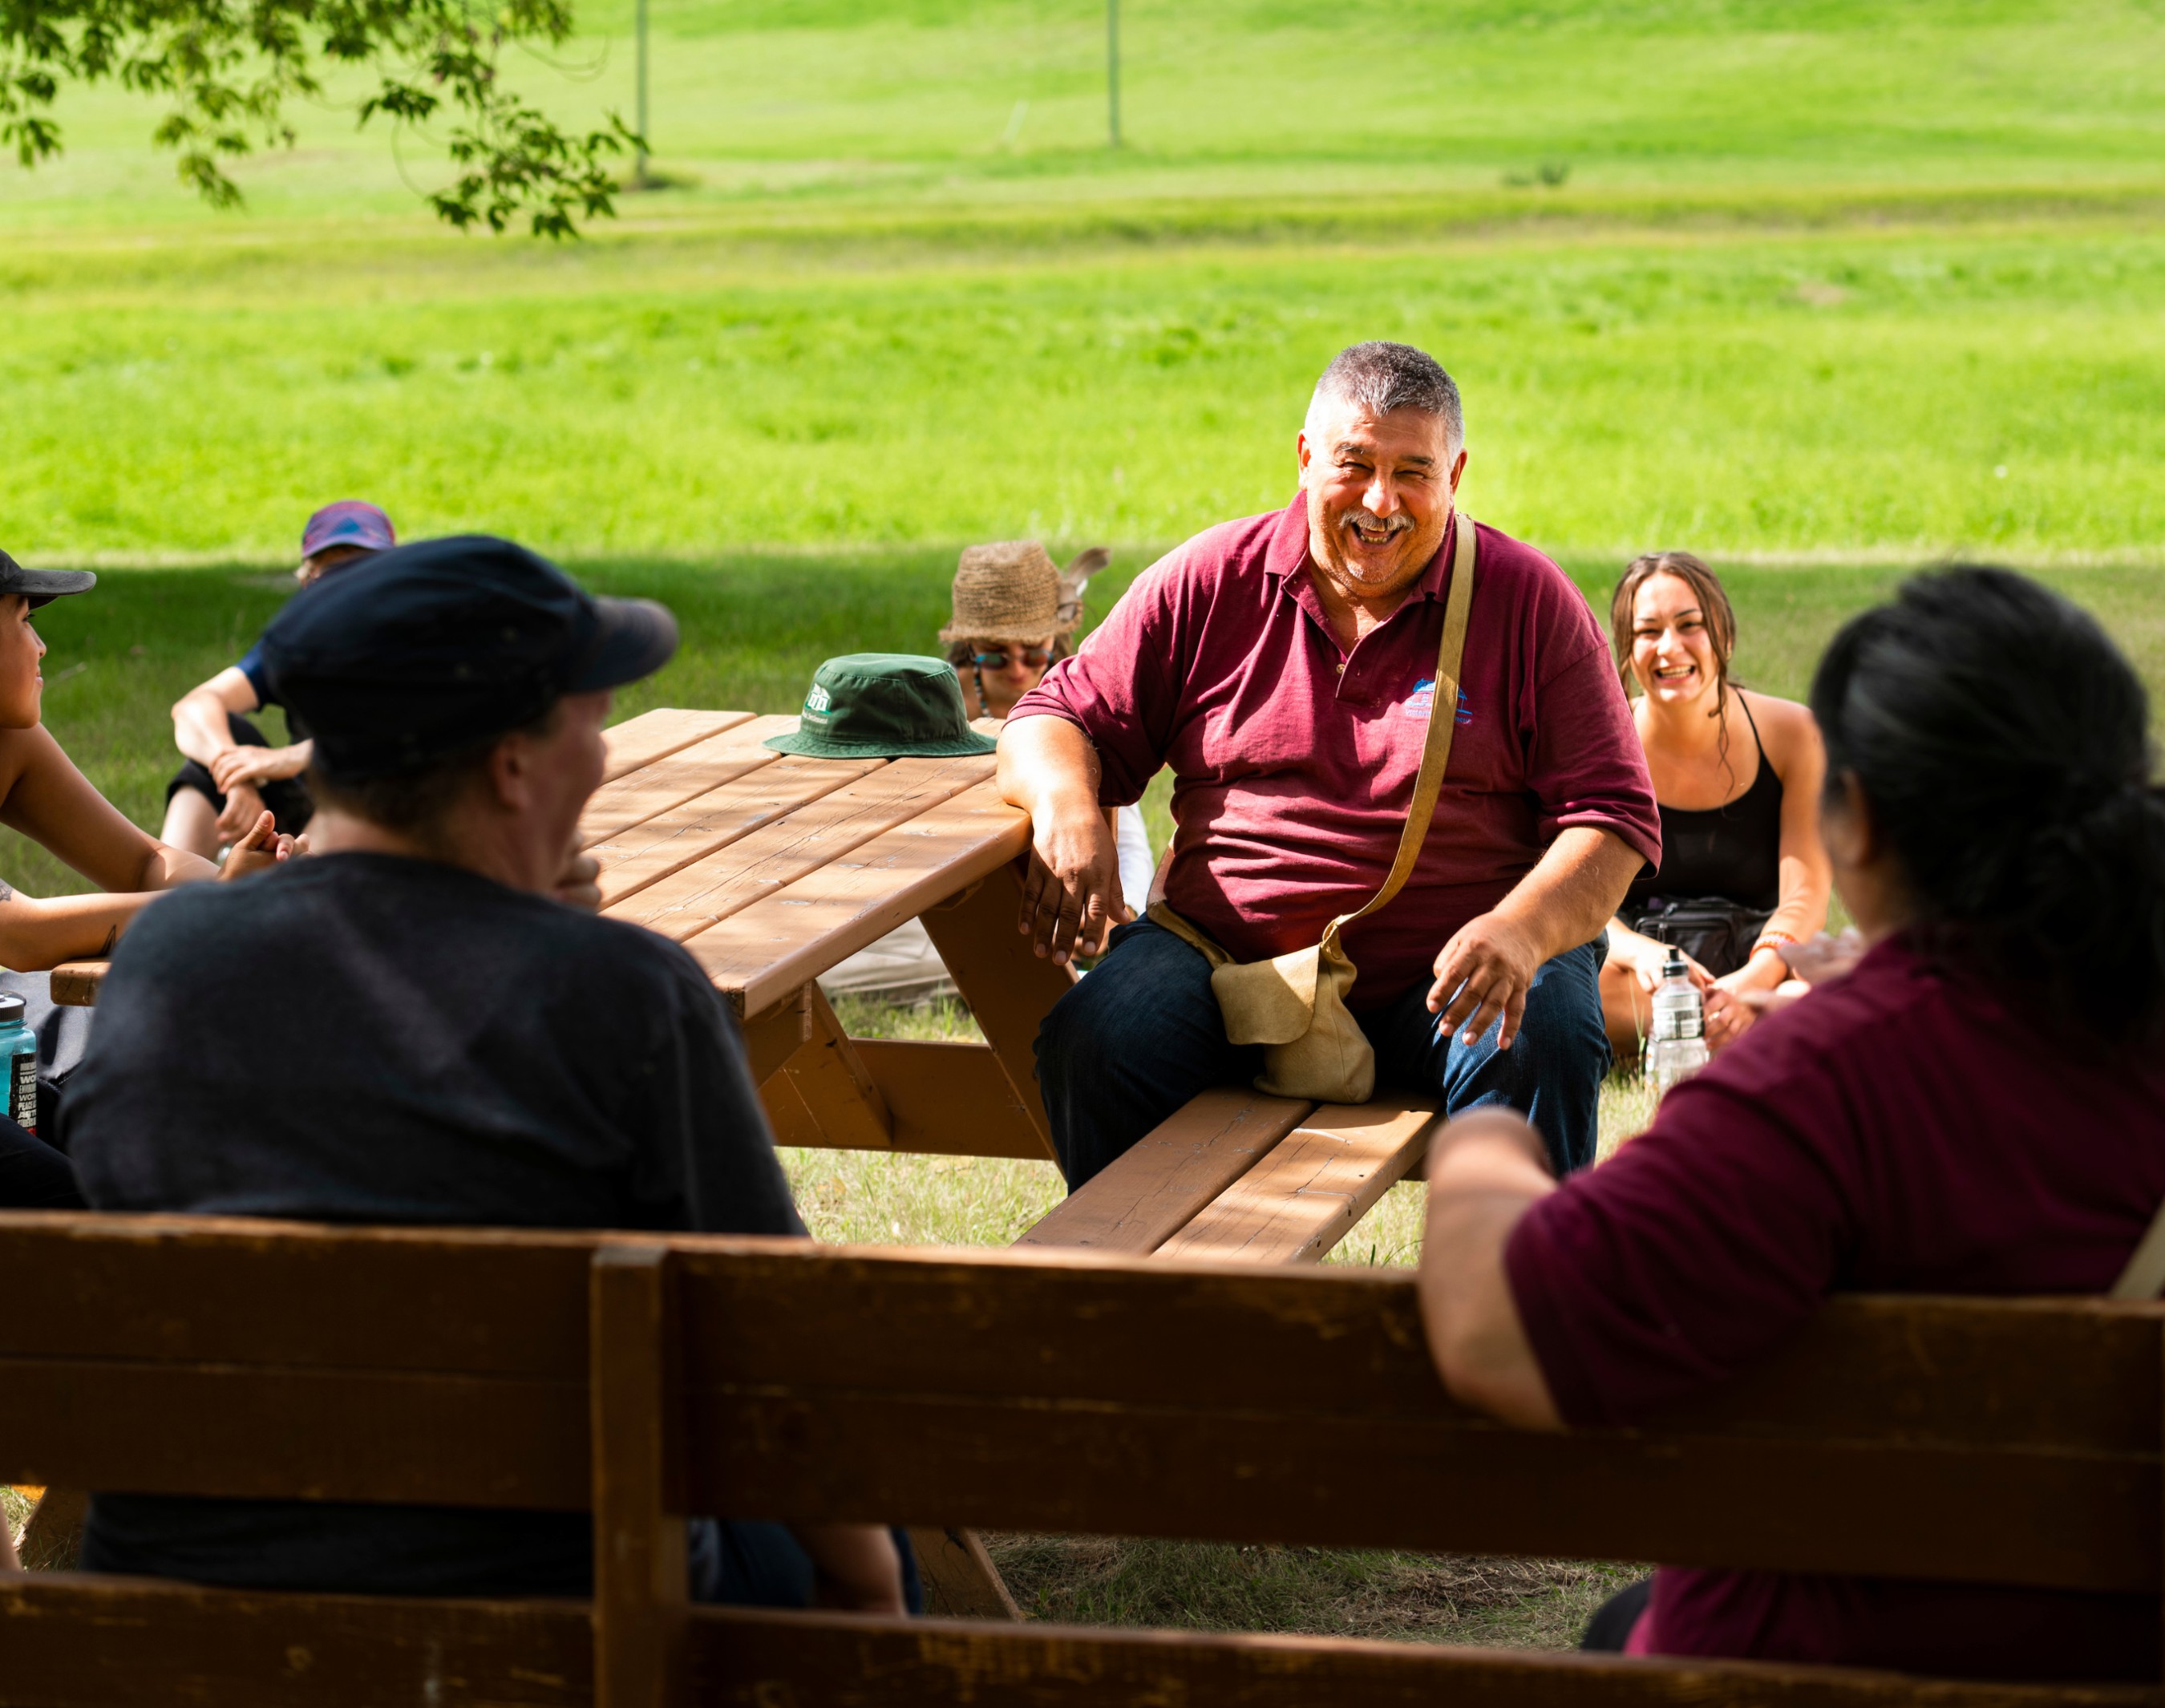 A Métis knowledge holder speaks with Native studies students during a land-based learning experience at Métis Crossing and Victoria Settlement in August 2022. (Photo: John Ulan)